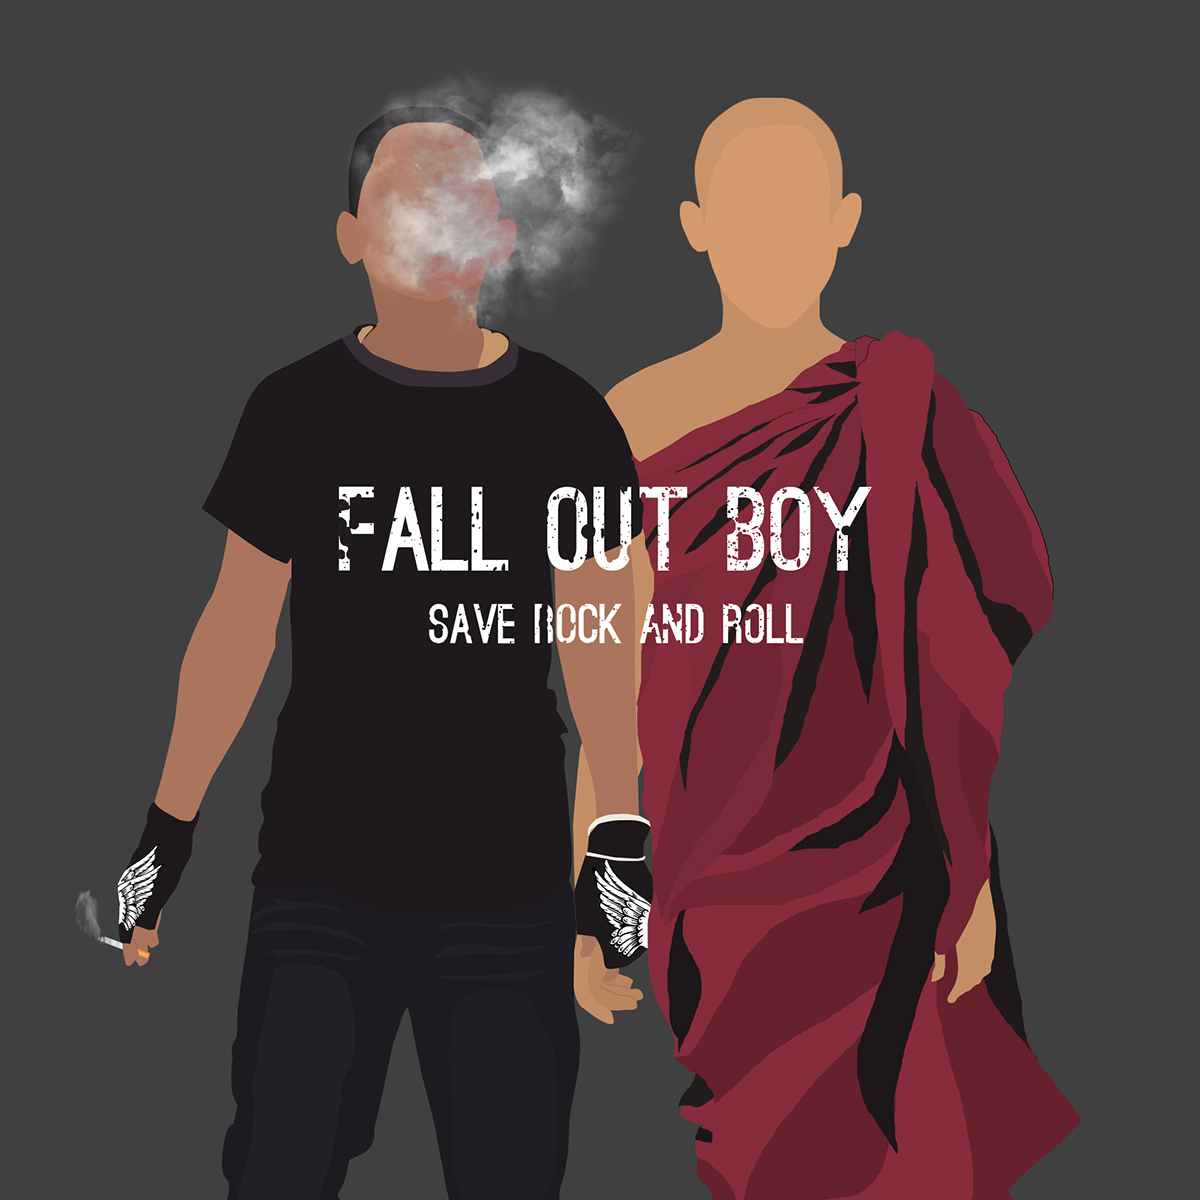 Fall out boy fall out boy save rock and Roll save rock and fan art Fan Art poster Album